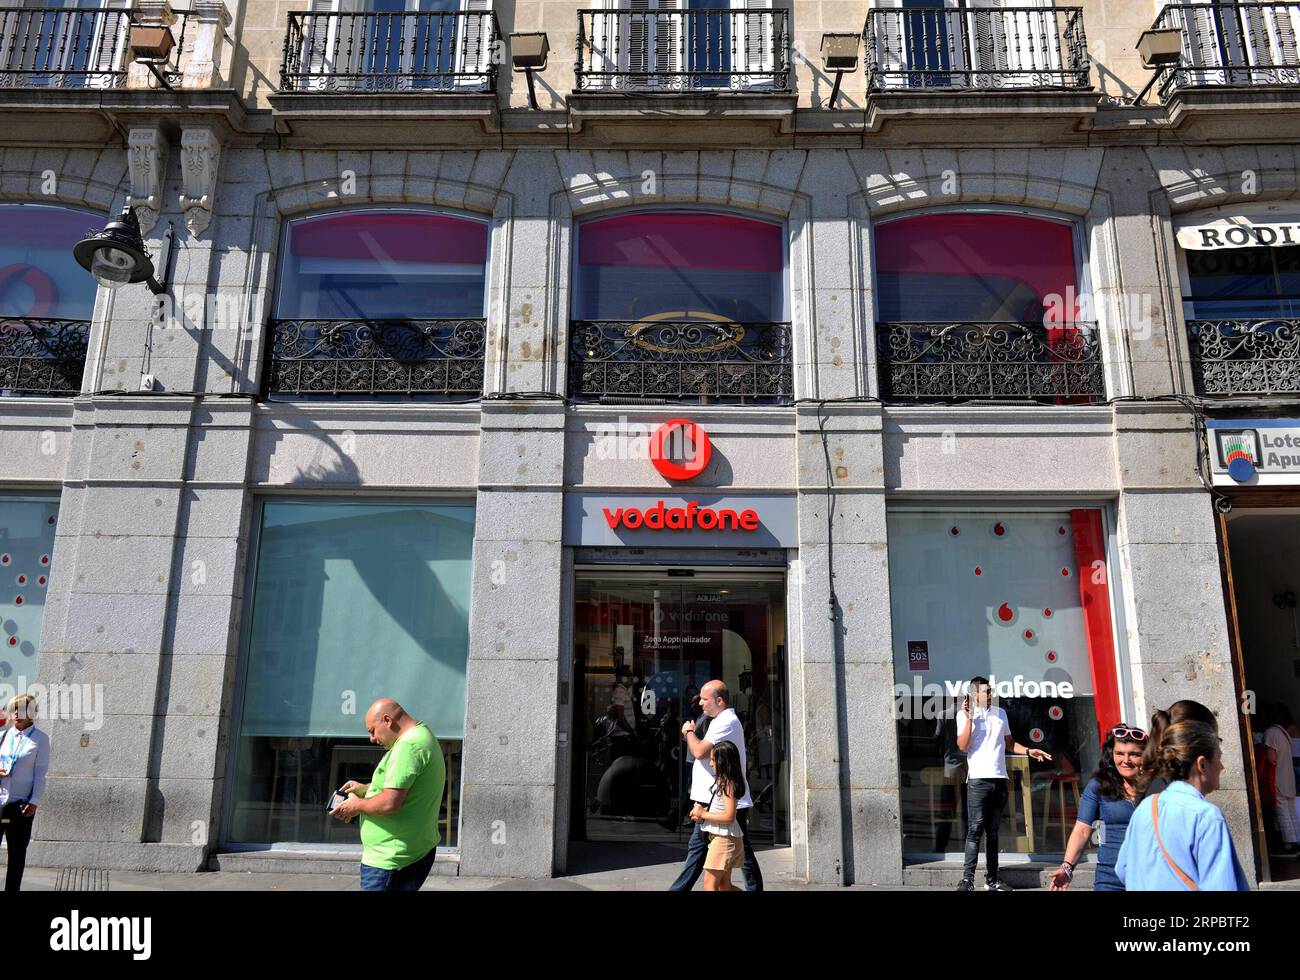 (190615) -- MADRID, June 15, 2019 (Xinhua) -- Pedestrians walk past a store of Vodafone Espana in Madrid, Spain, on June 15, 2019. In cooperation with Chinese telecom giant Huawei, Vodafone Espana on Saturday rolled out the first commercial 5G mobile services in Spain, making it one of the first European countries with the ultrafast mobile network in Europe. (Xinhua/Guo Qiuda) SPAIN-MADRID-VODAFONE-HUAWEI-FIRST 5G NETWORK PUBLICATIONxNOTxINxCHN Stock Photo